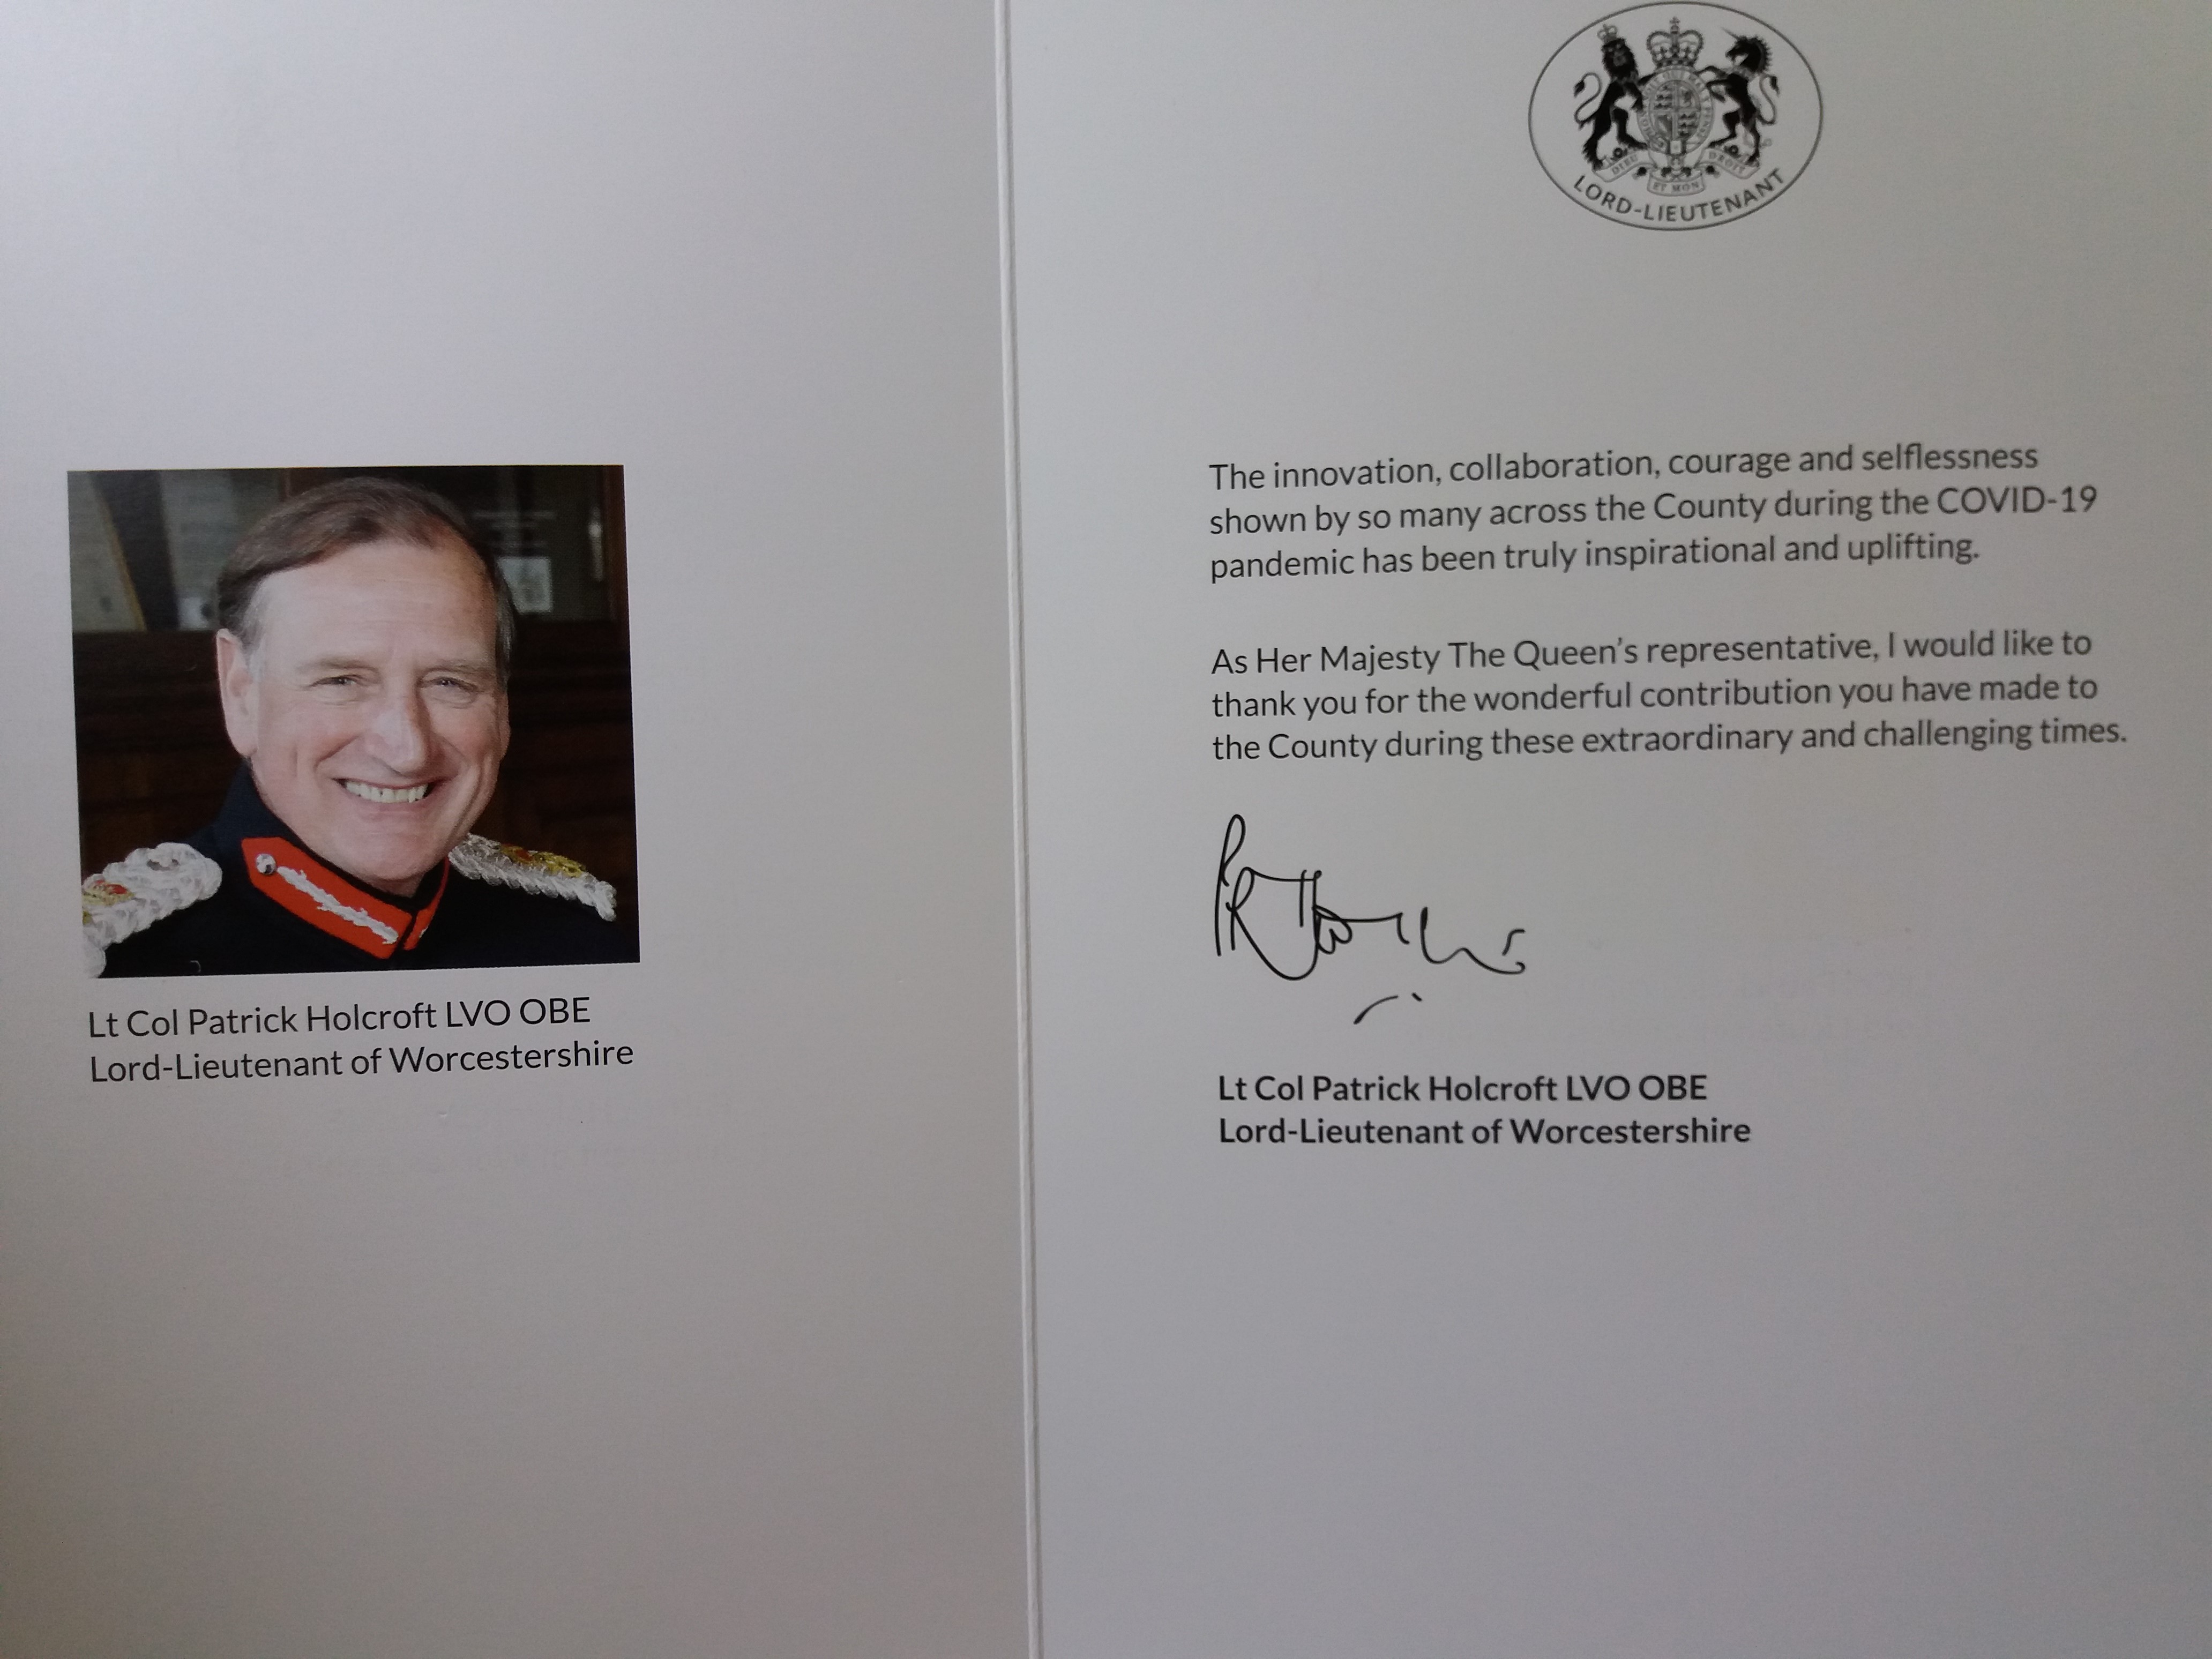 A photo of a card from the Lord Lieutenant of Worcestershire